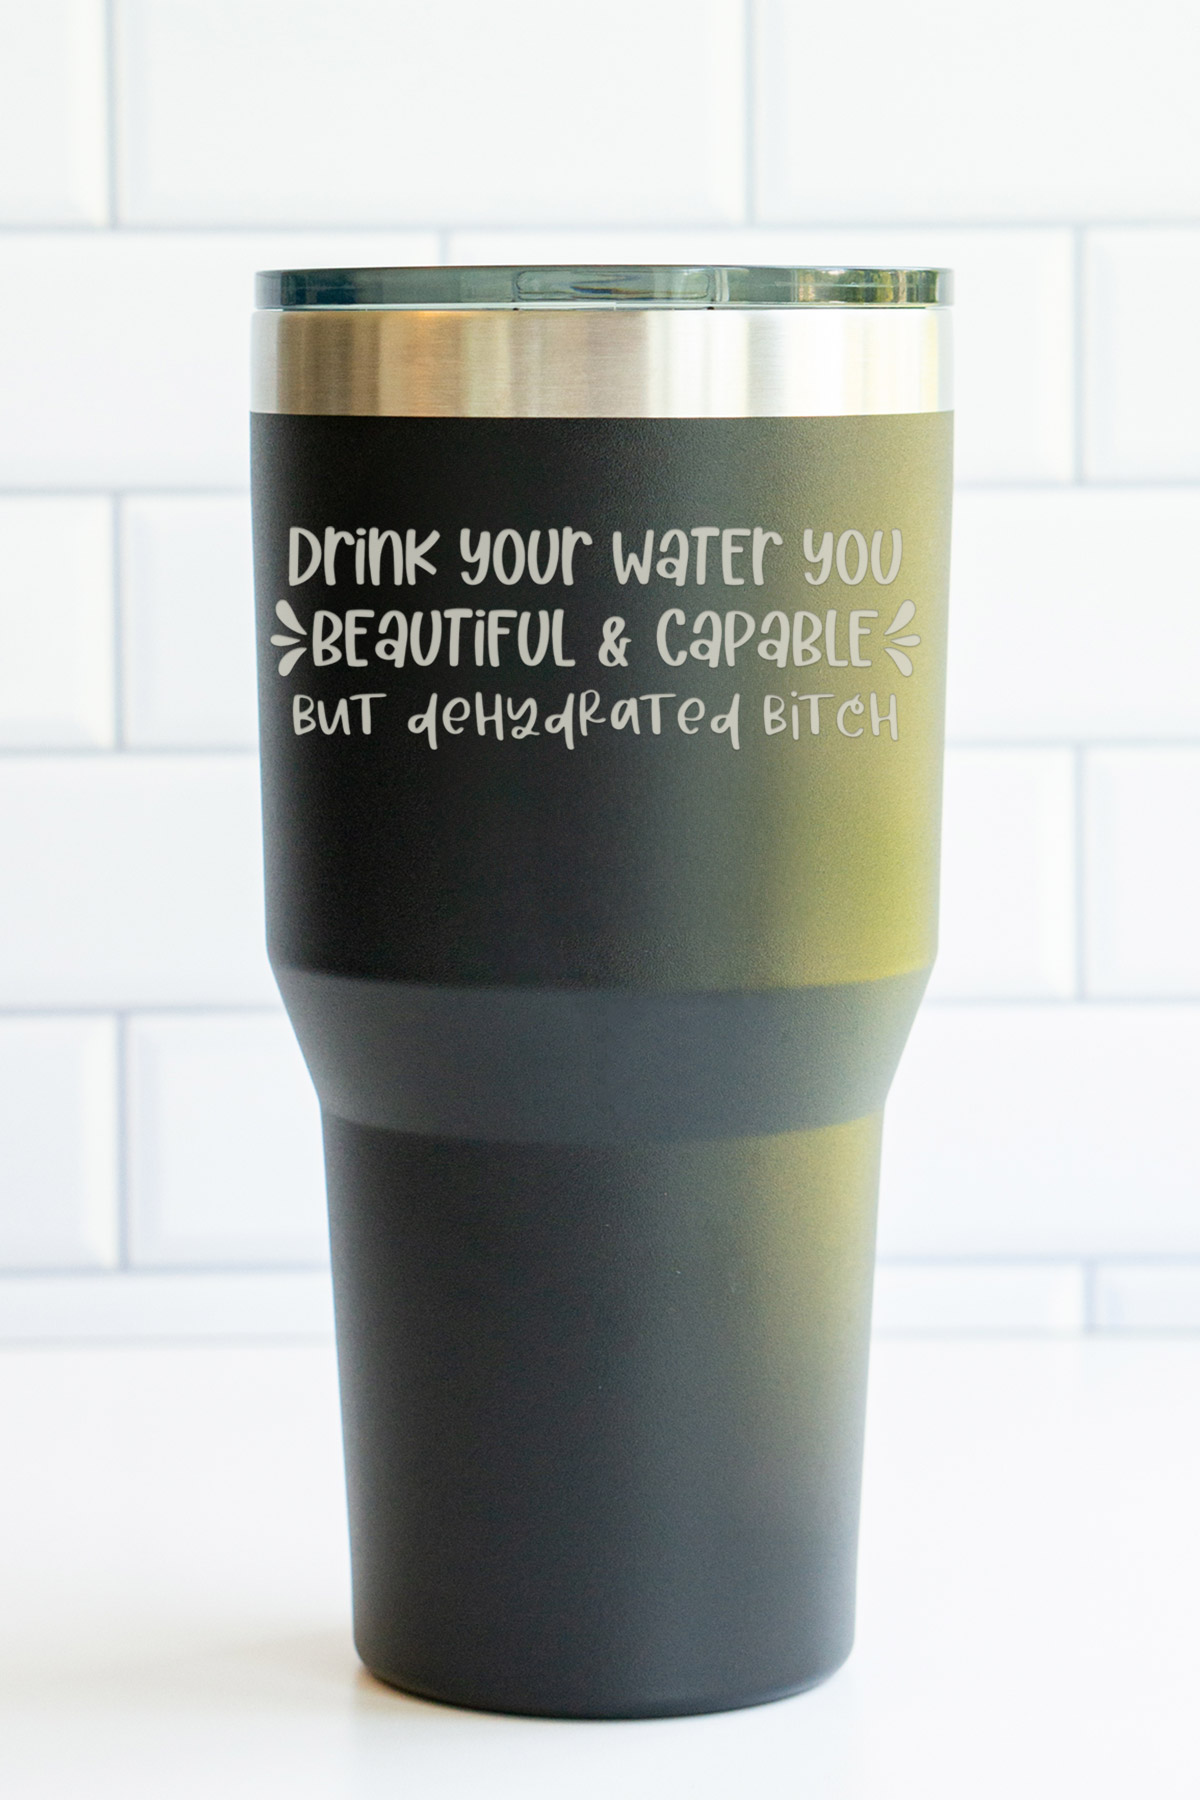 The image is of a laser engraved tumbler that says drink your water you beautiful & capable but dehydrated bitch.